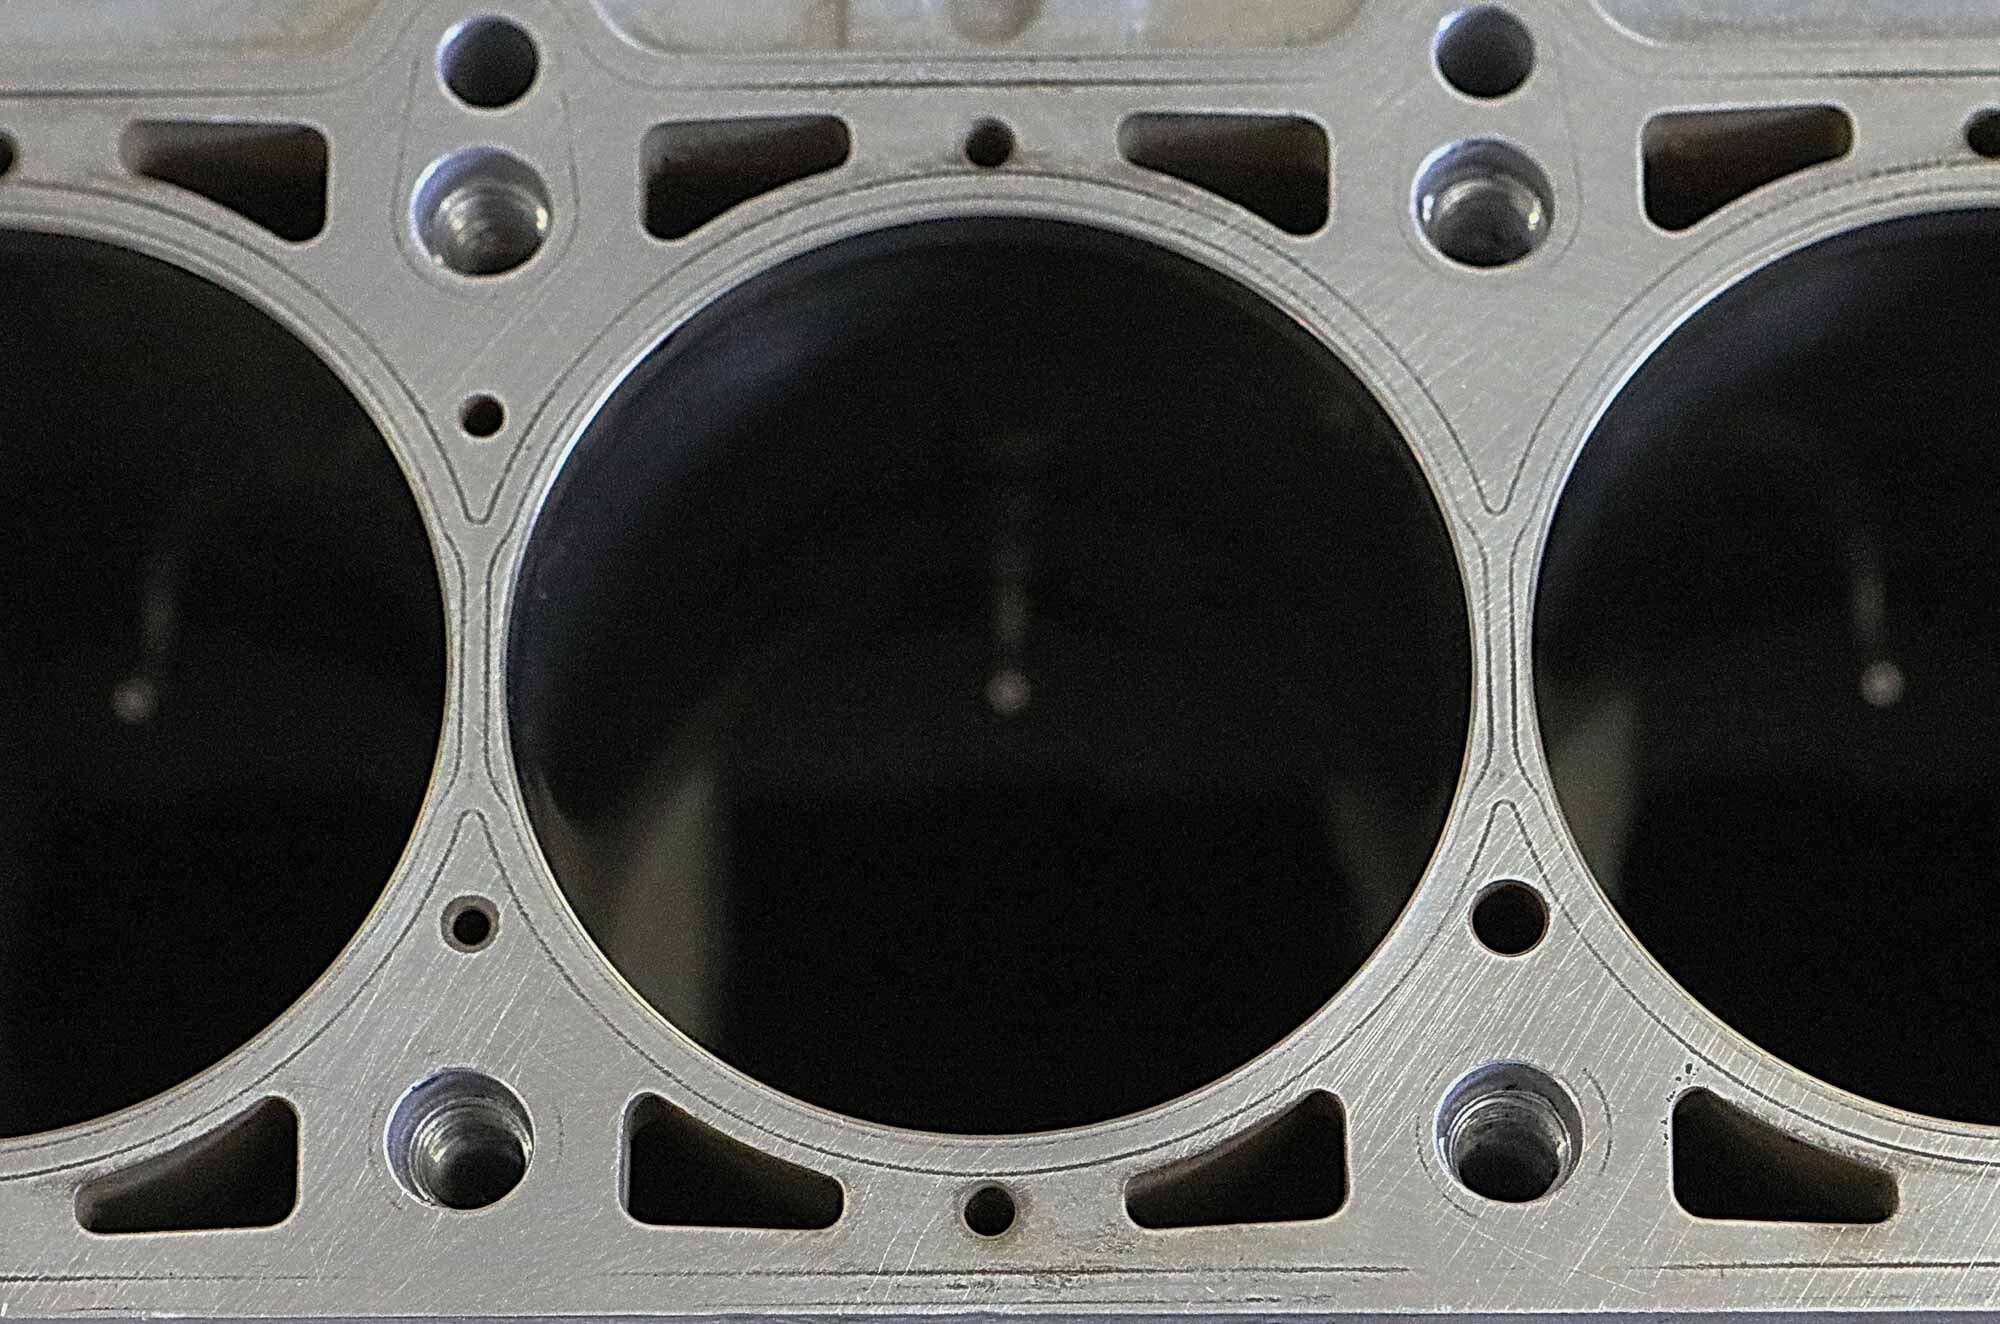 At 81mm, the 950’s cylinder bores are 2mm larger than the 800’s. To make them fit and keep the engine narrow, the cylinder barrels are integral to the aluminum block, Nikasil plated, and use a siamesed design. Center-to-center bore spacing remains unchanged, a fundamental factor in keeping the new engine and its tooling costs competitively priced.